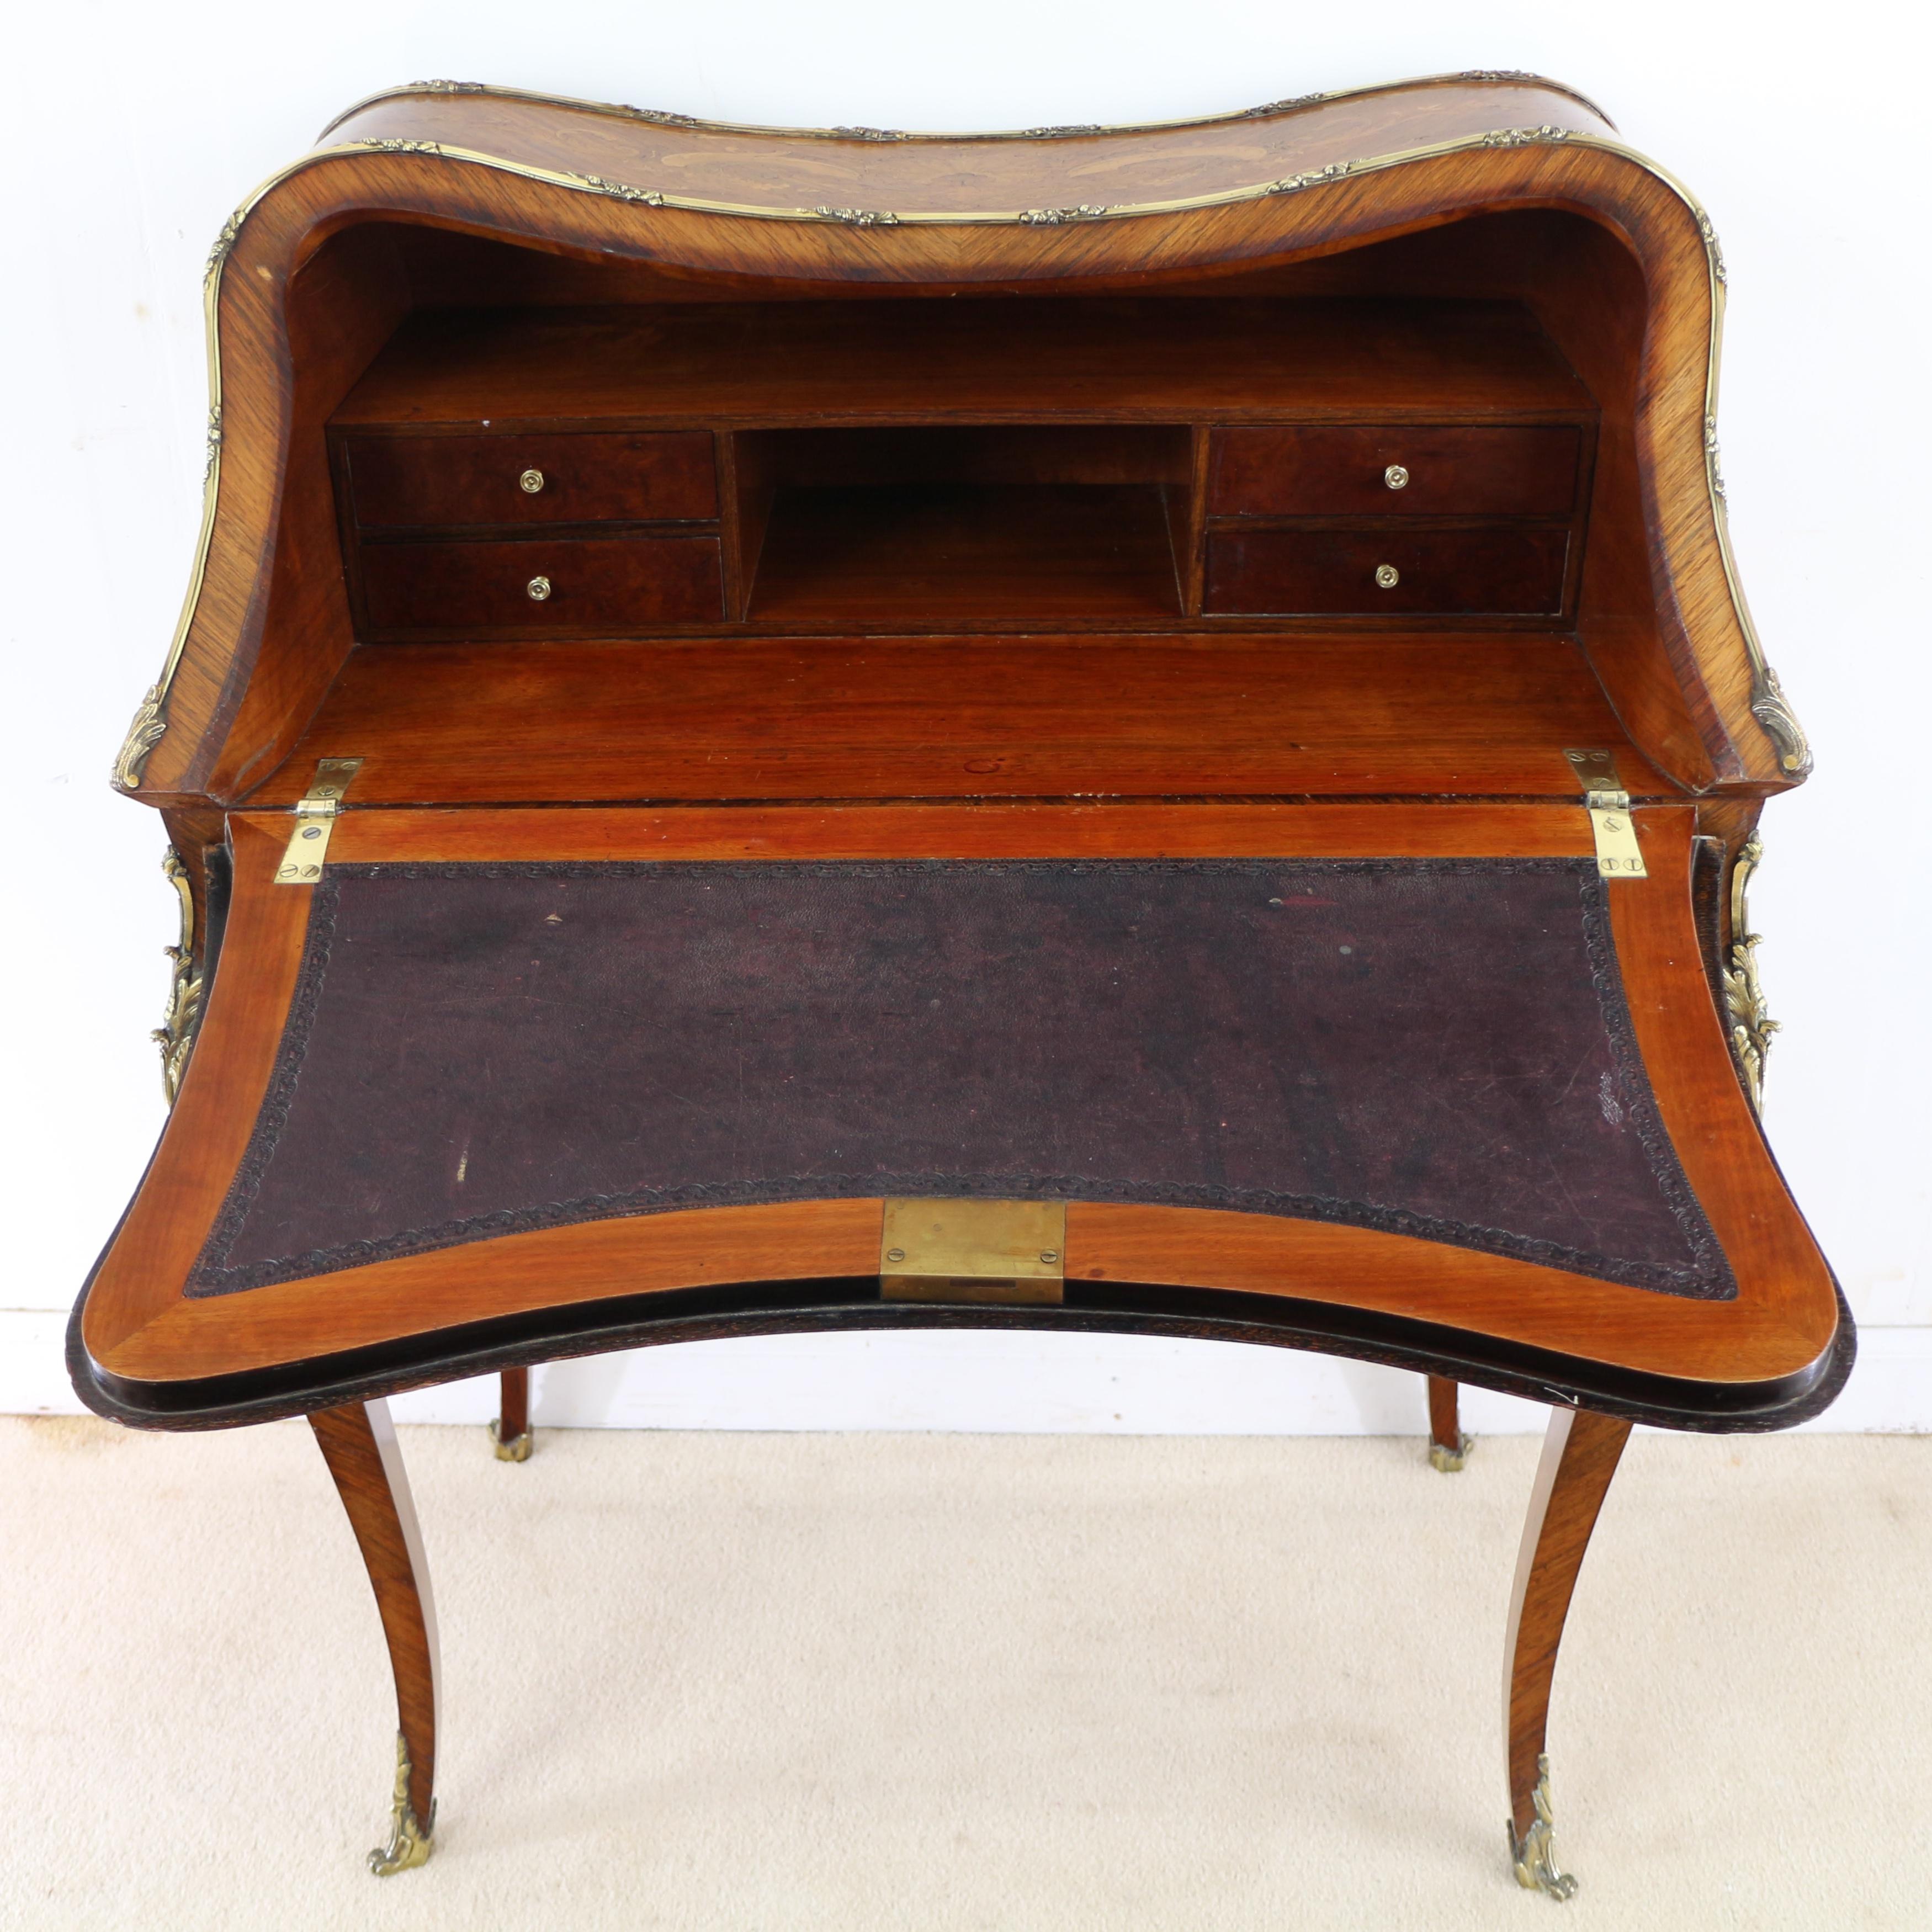 Antique French Louis XV Style Kingwood and Marquetry Bureau de Dame For Sale 10